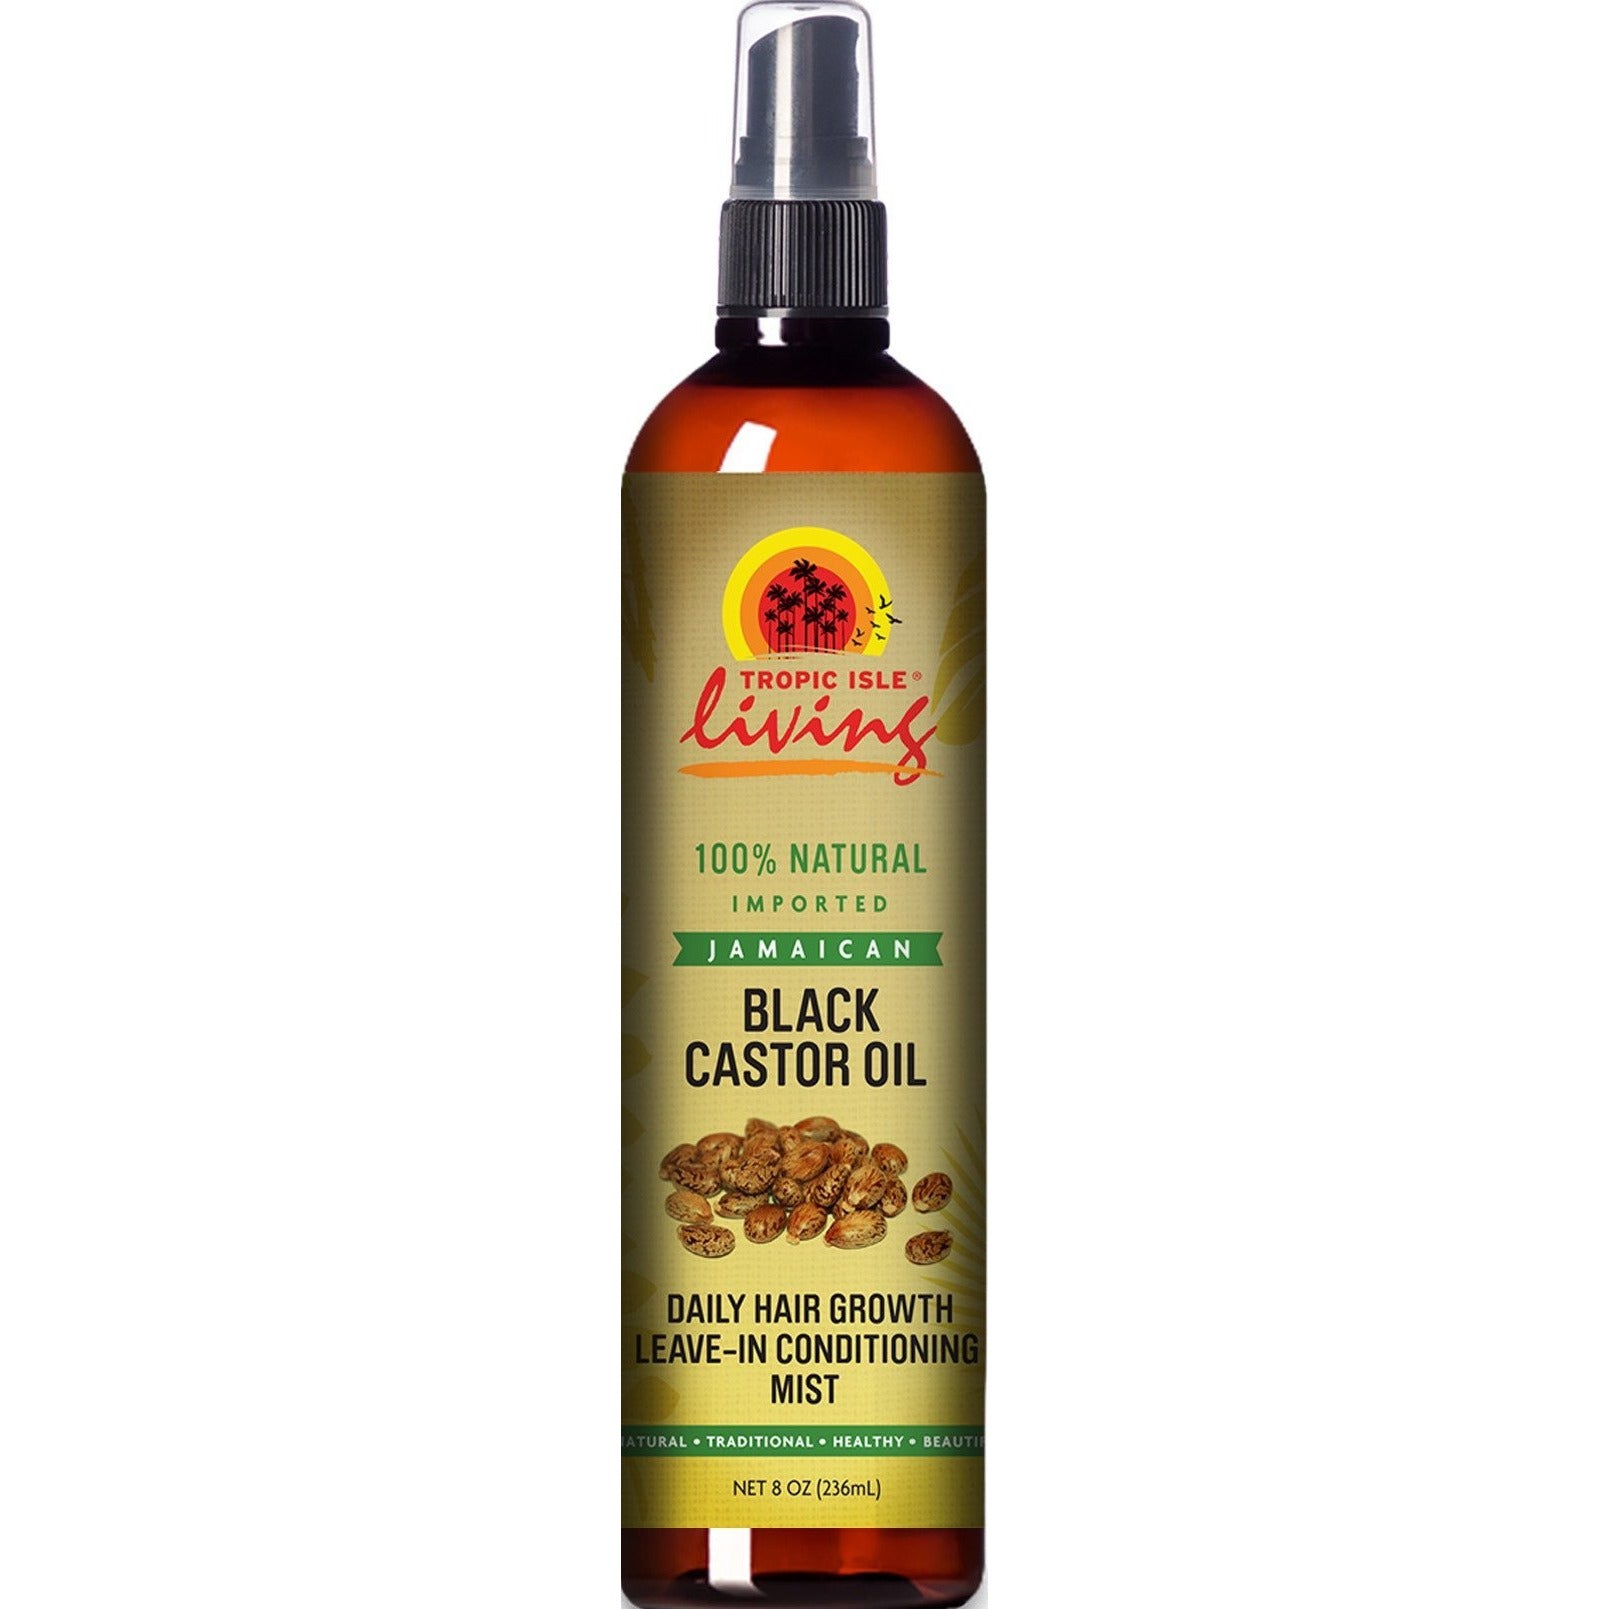 Tropic Isle Living Jamaican Black Castor Oil Daily Hair Growth Leave-in Conditioning Mist 8 Oz